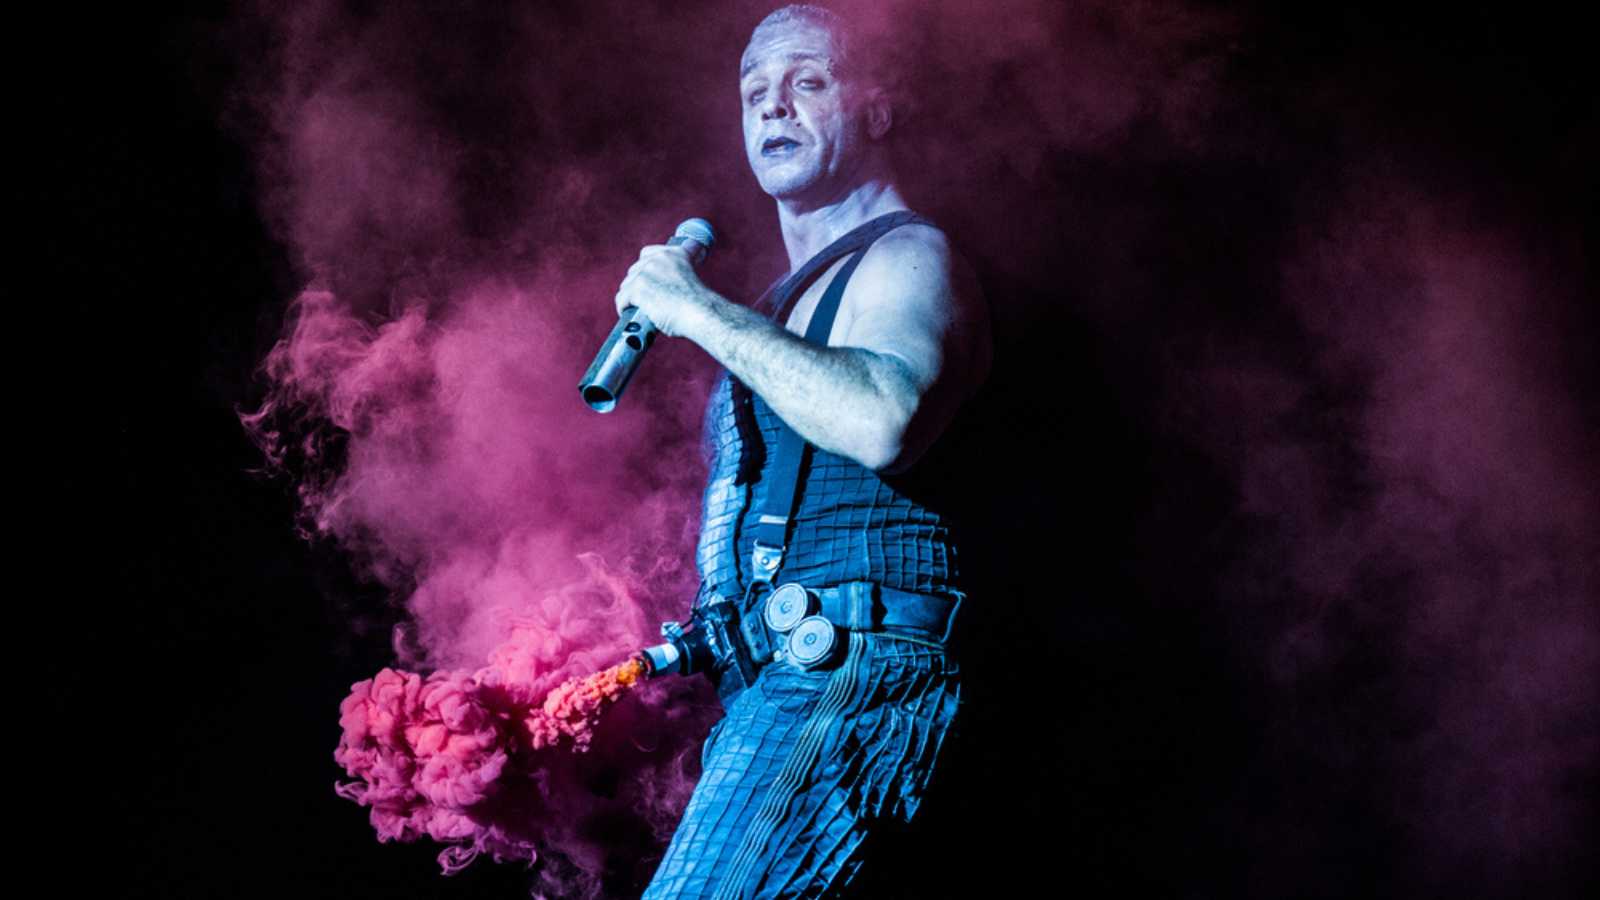 MOSCOW, RUSSIA - FEBRUARY 10, 2012: German heavy-metal band Rammstein performing live at Olimpiysky Stadium